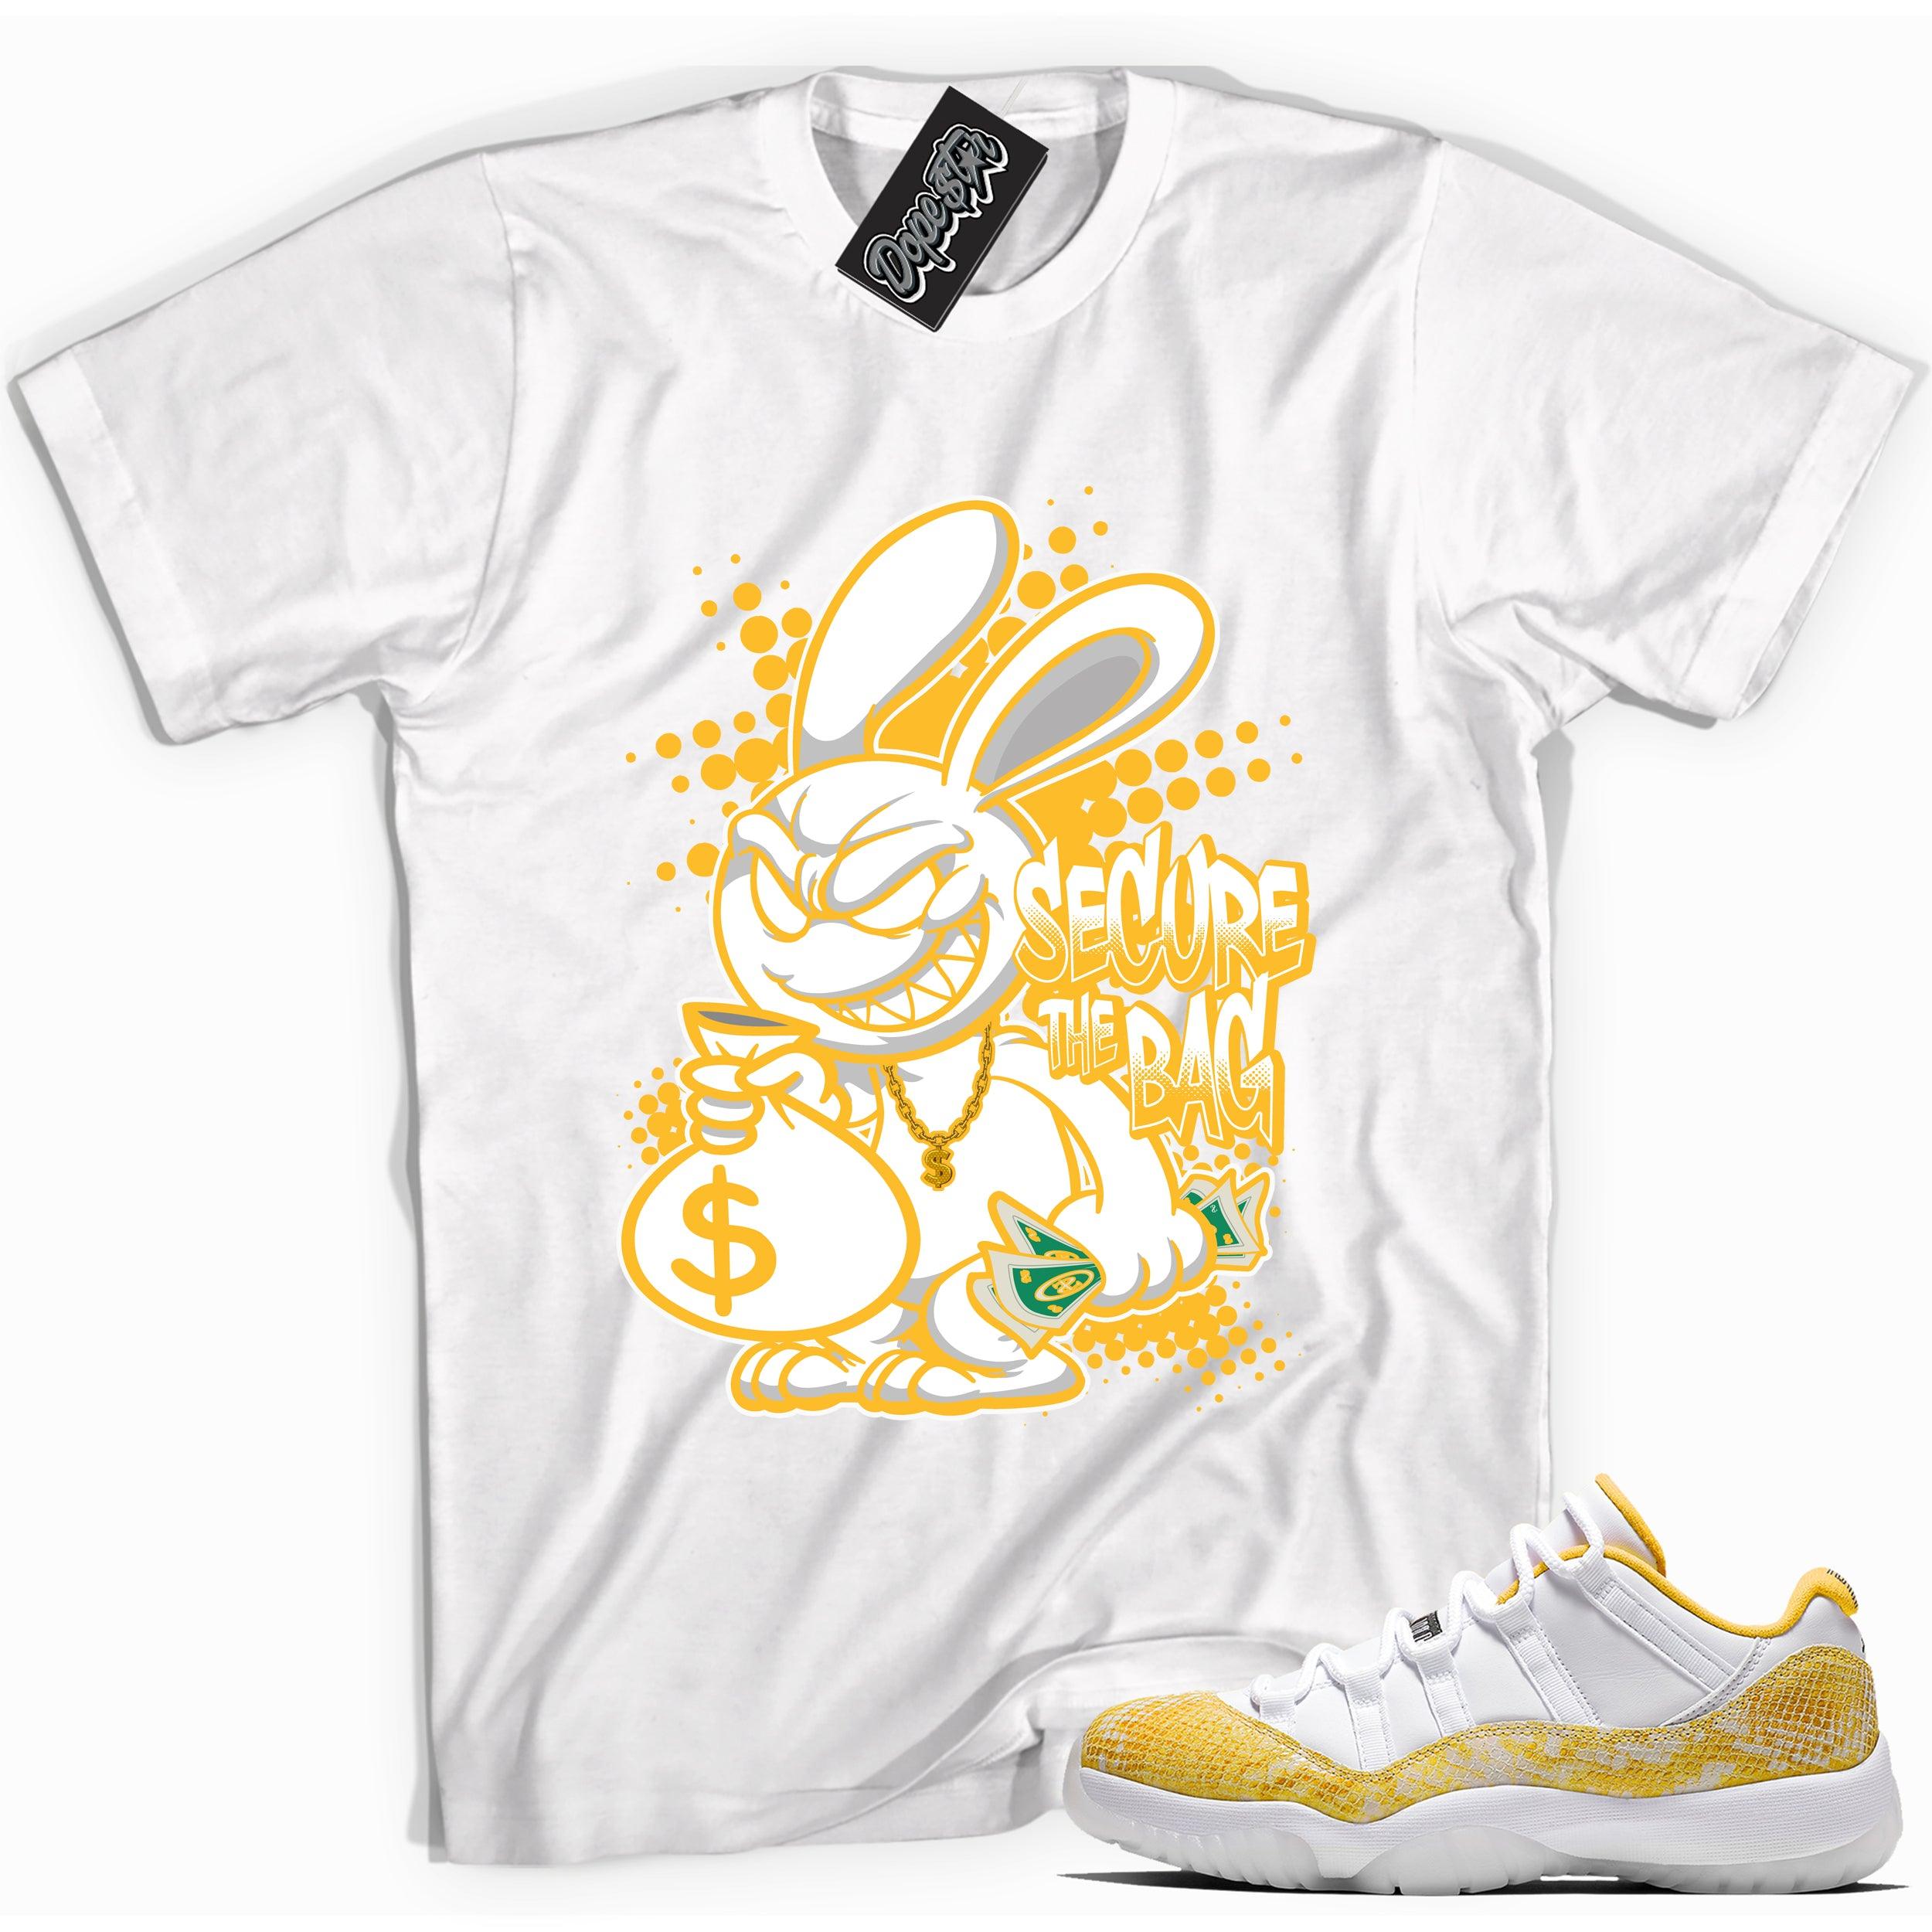 Cool white graphic tee with 'secure the bag' print, that perfectly matches Air Jordan 11 Retro Low Yellow Snakeskin sneakers